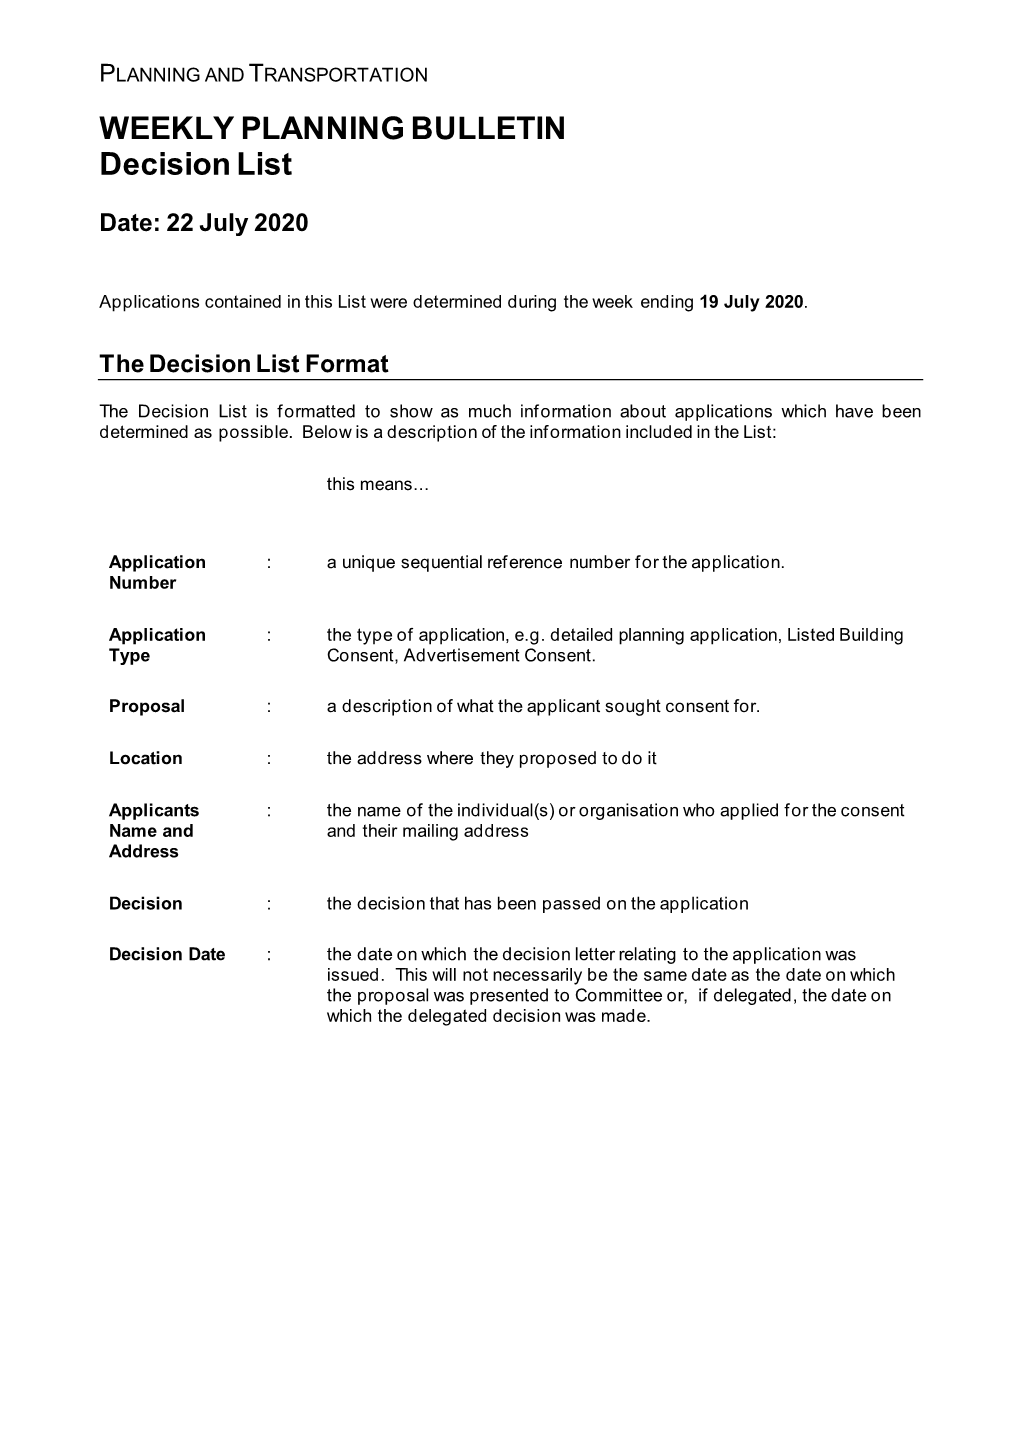 Planning Applications Determined 19 July 2020